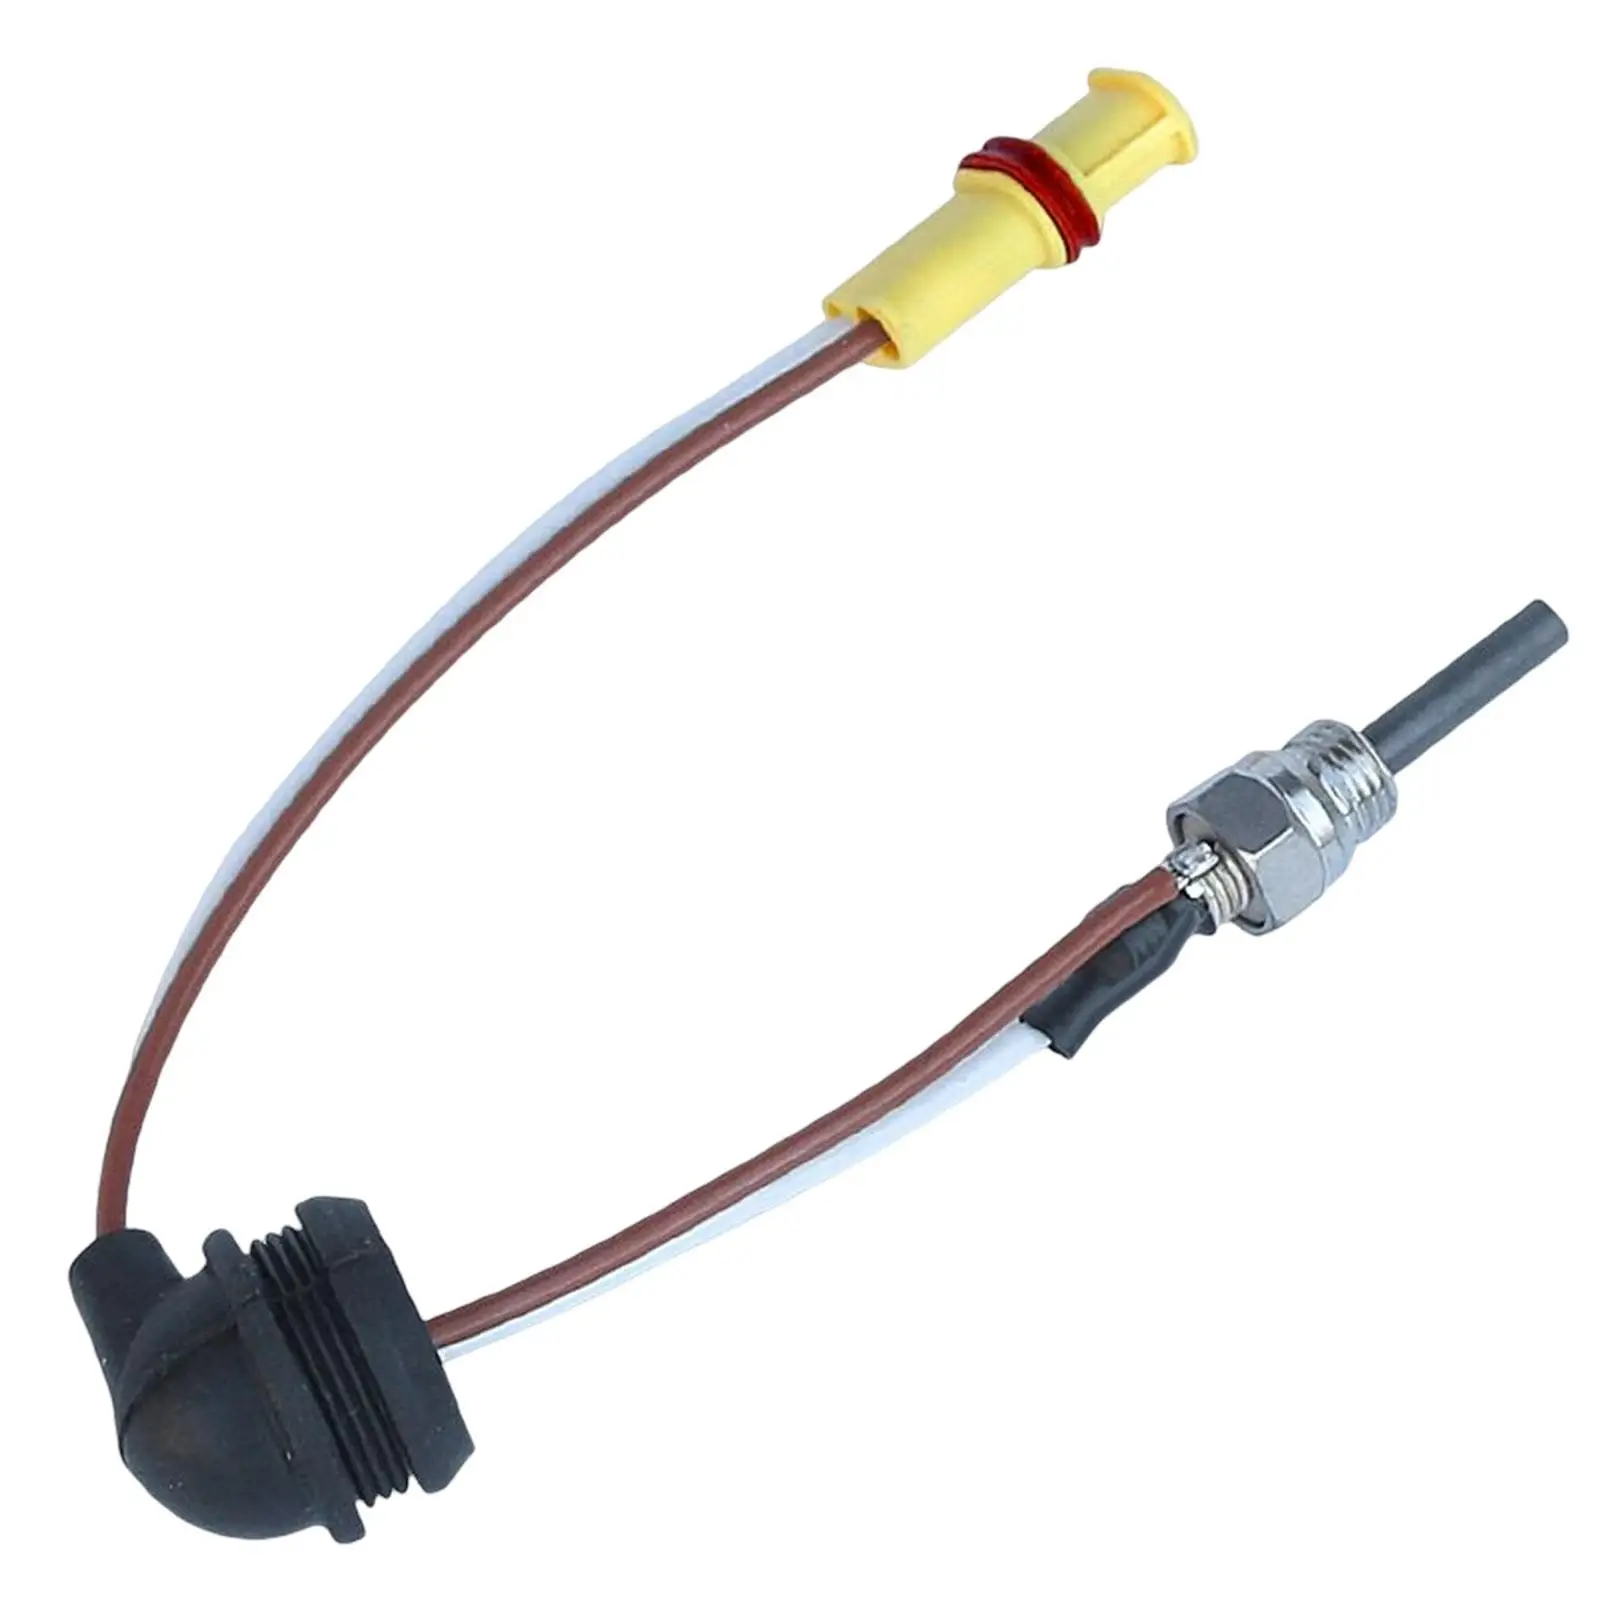 Portable Parking Heater Glow Plug Spark Plug Easy to Install Heater Flame Heater Practical for D2 D4 Boat Bus Accessory